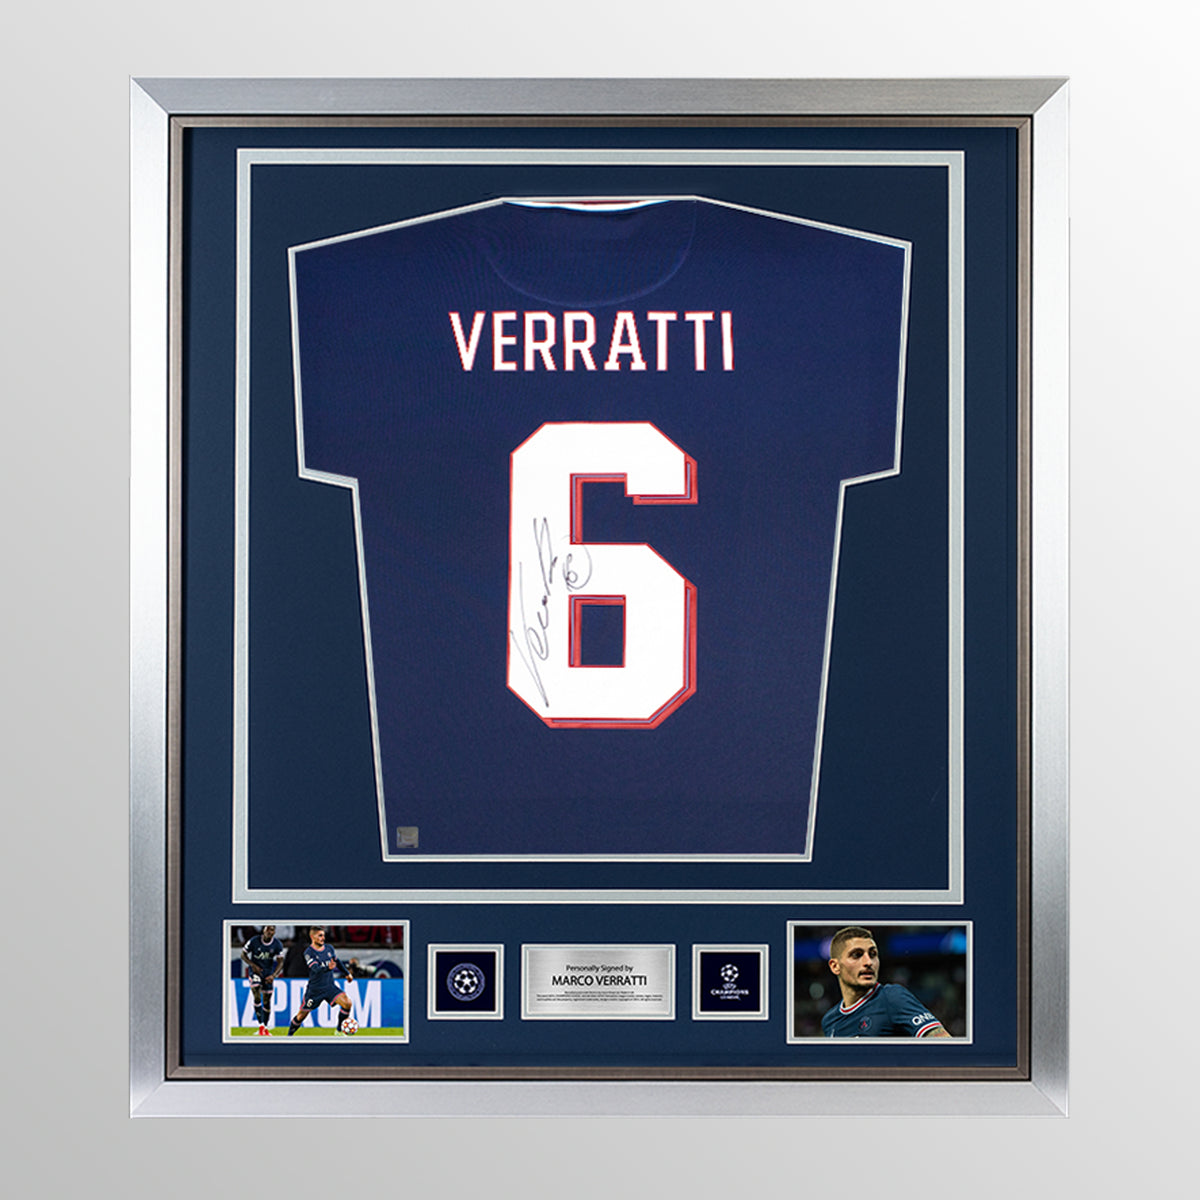 Marco Verratti Official UEFA Champions League Back Signed and Framed Paris Saint-Germain 2021-22 Home Shirt With Fan Style Number UEFA Club Competitions Online Store